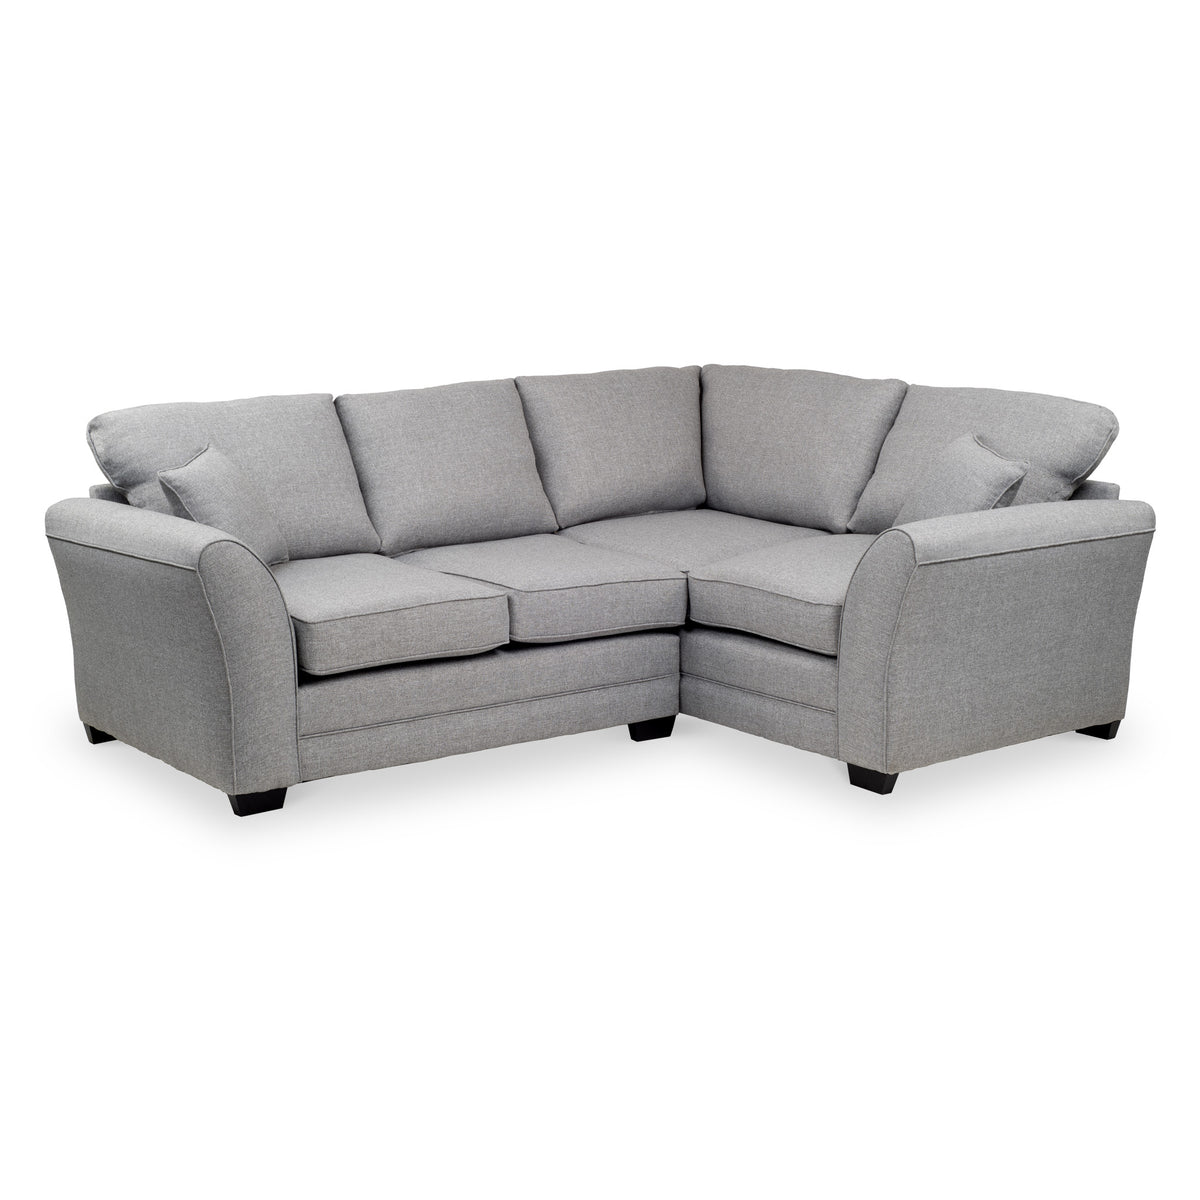 St Ives Corner Sofa in Silver by Roseland Furniture